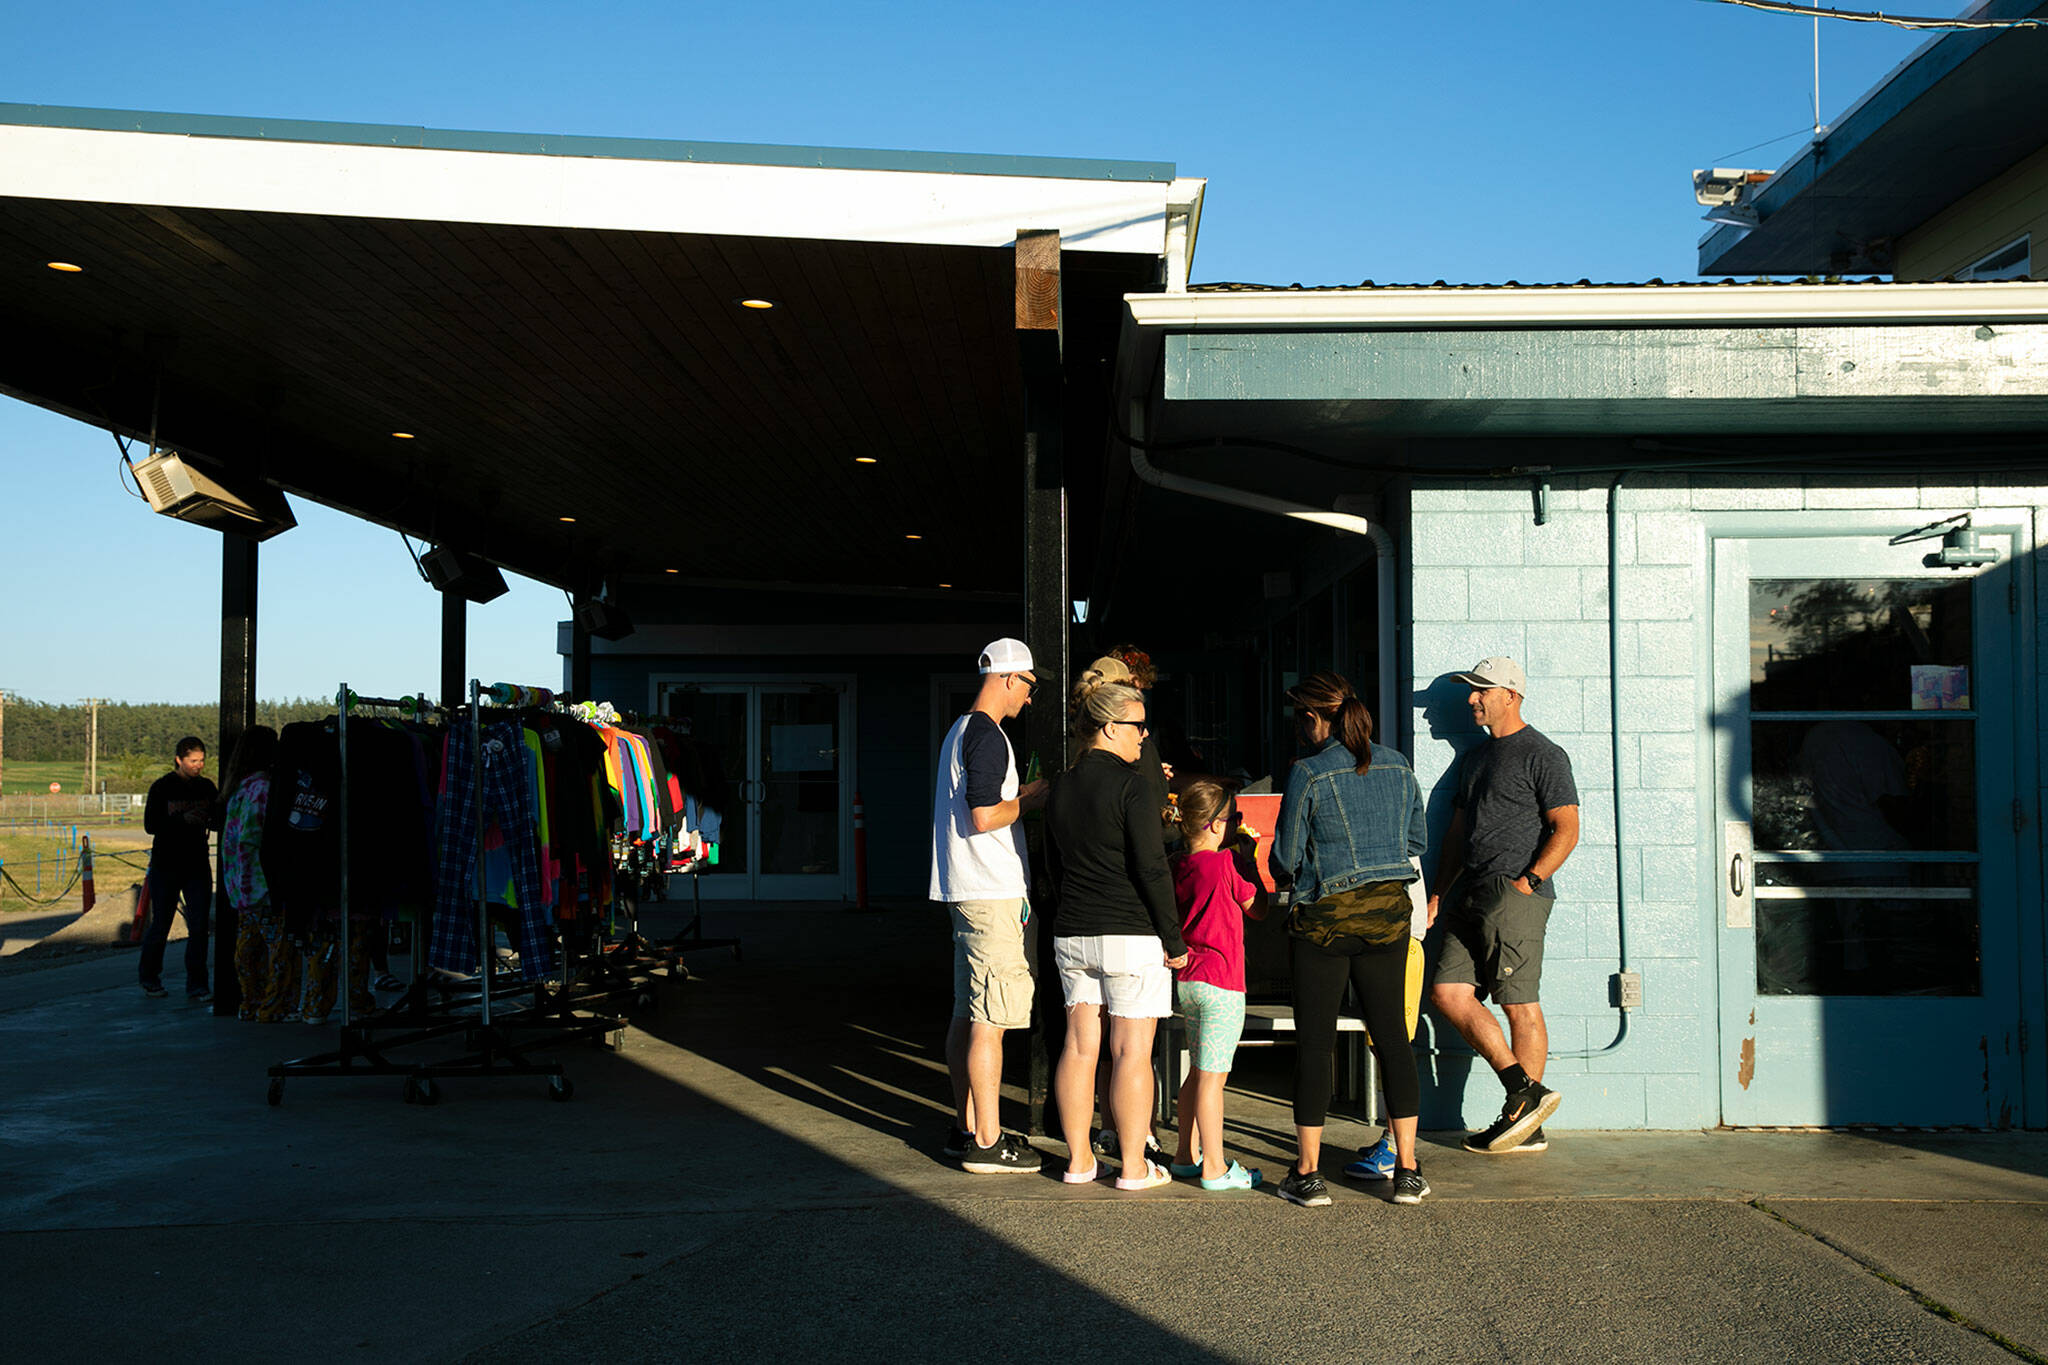 People gather before the playing of a movie at the Blue Fox Drive-In Theater in Oak Harbor. (Ryan Berry / The Herald)